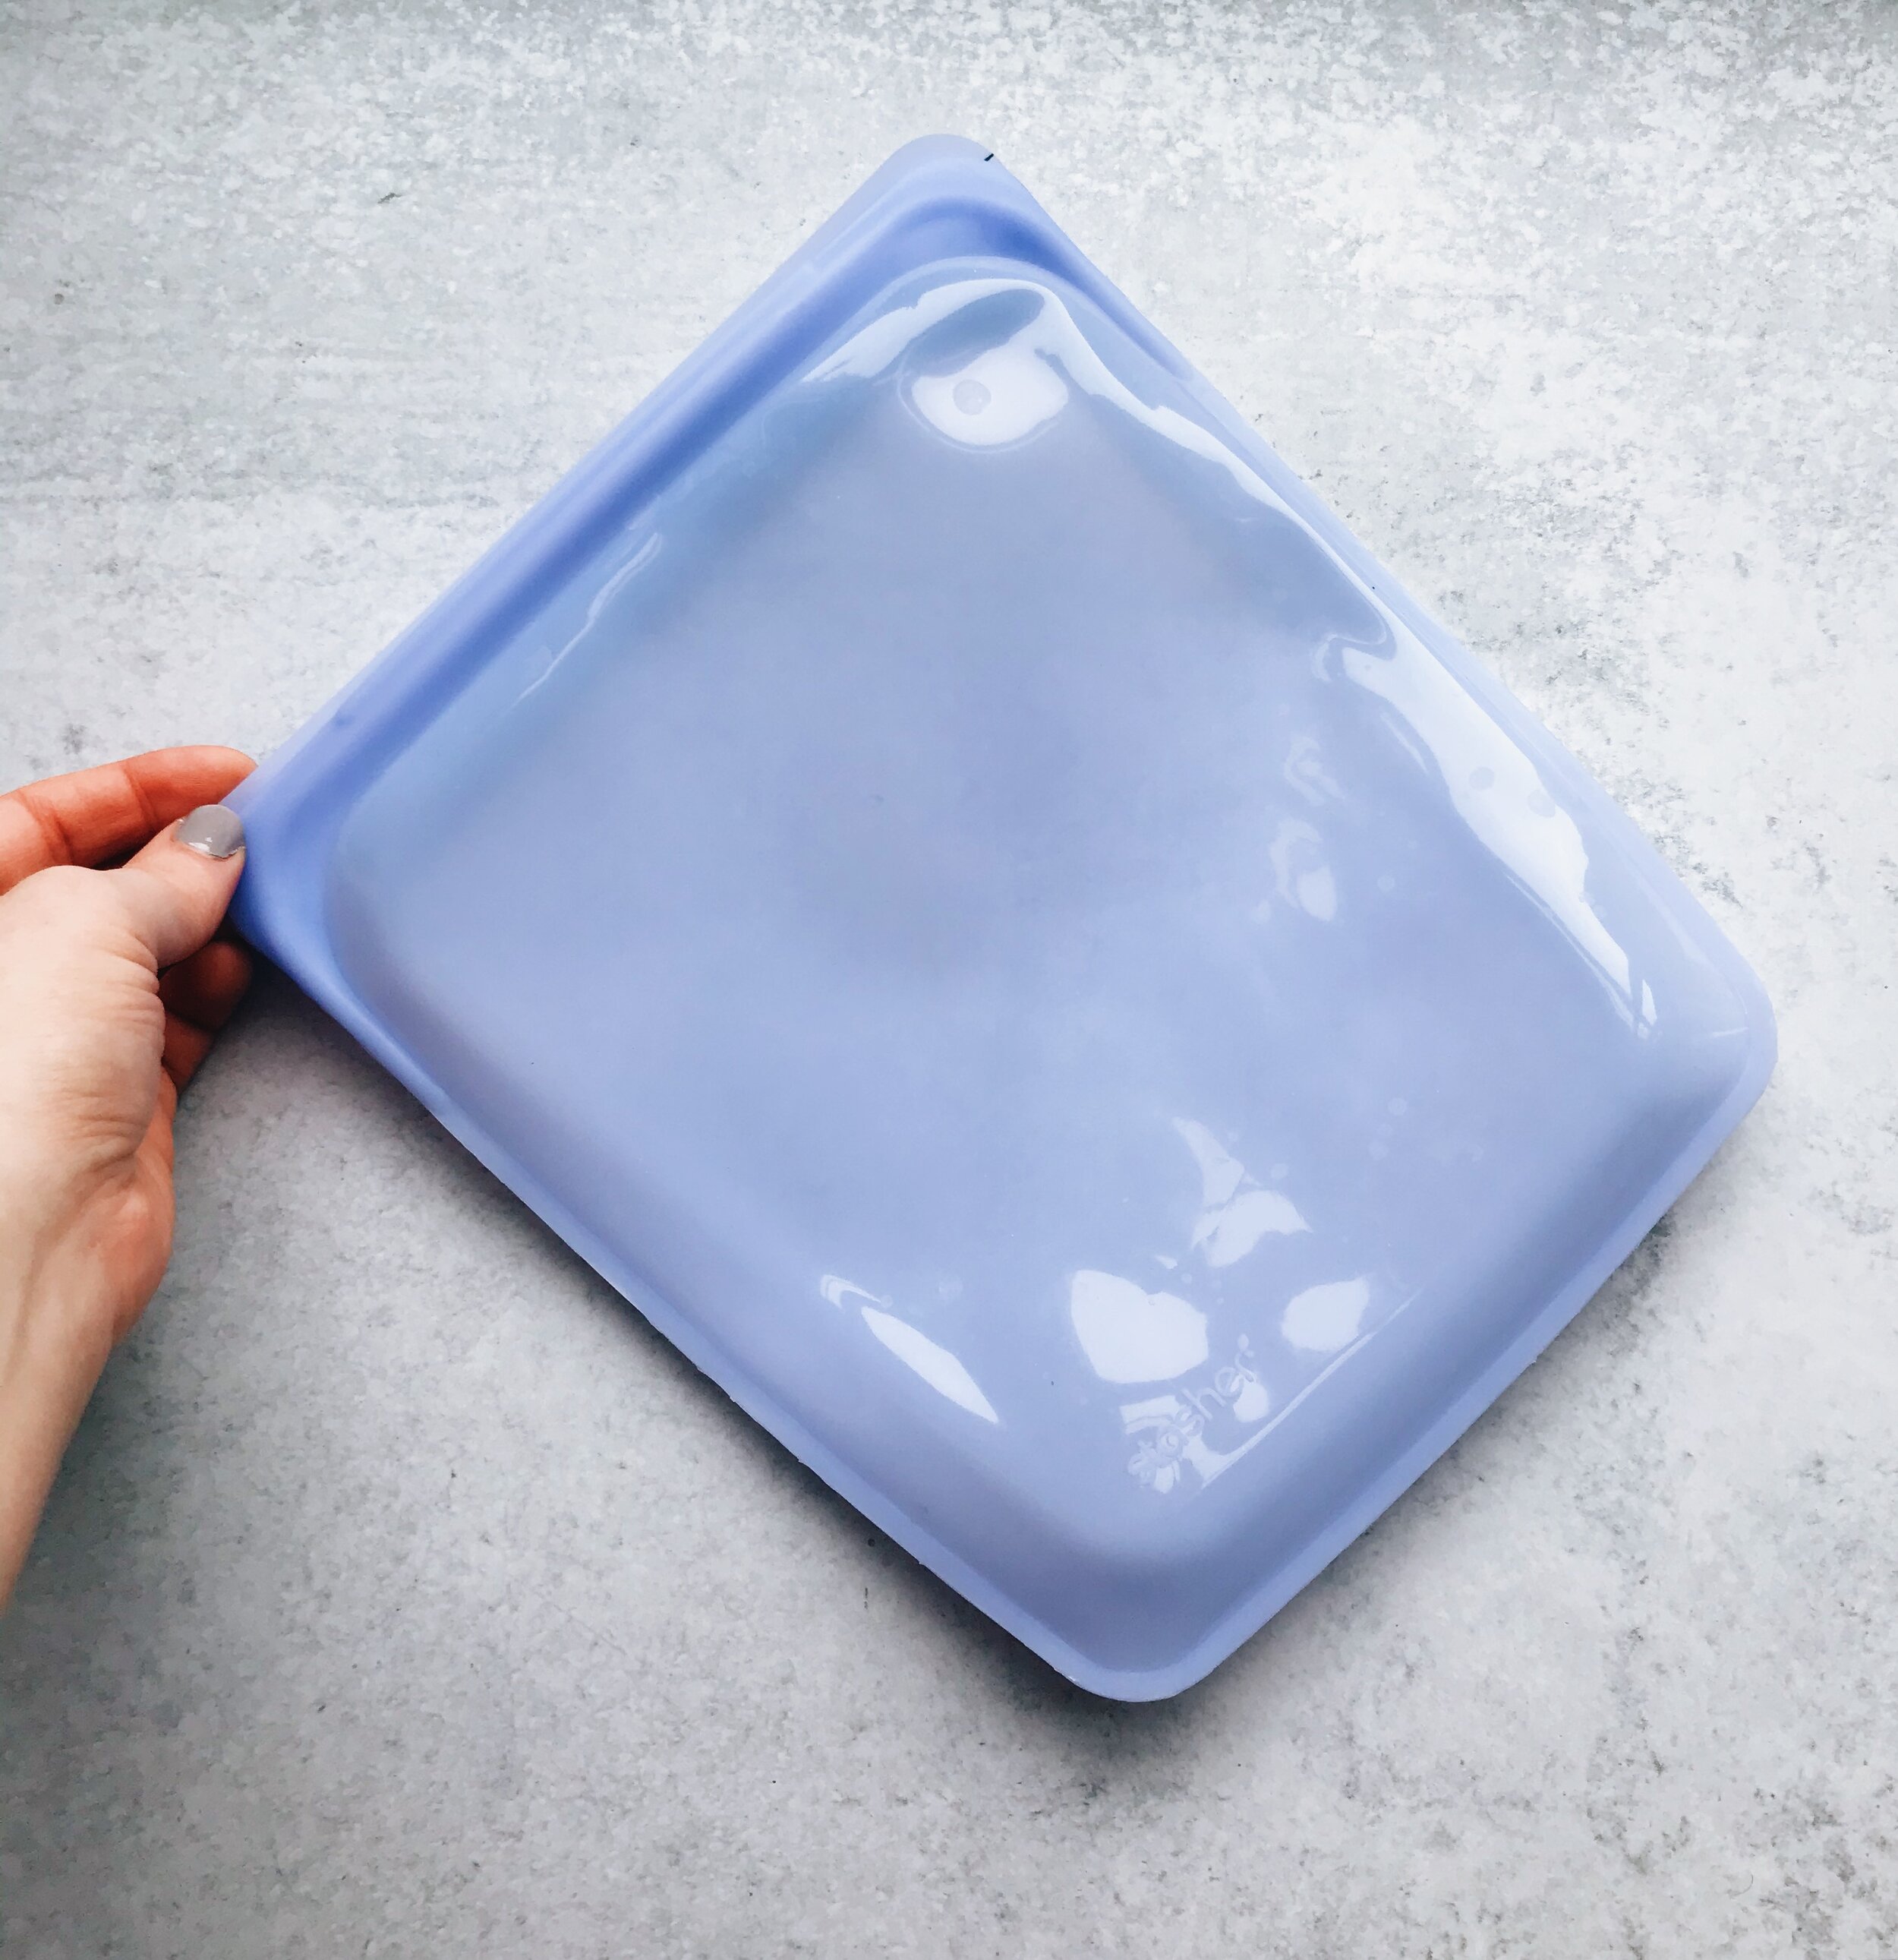 Stasher Silicone Bag Review: Great for Sous Vide Cooking